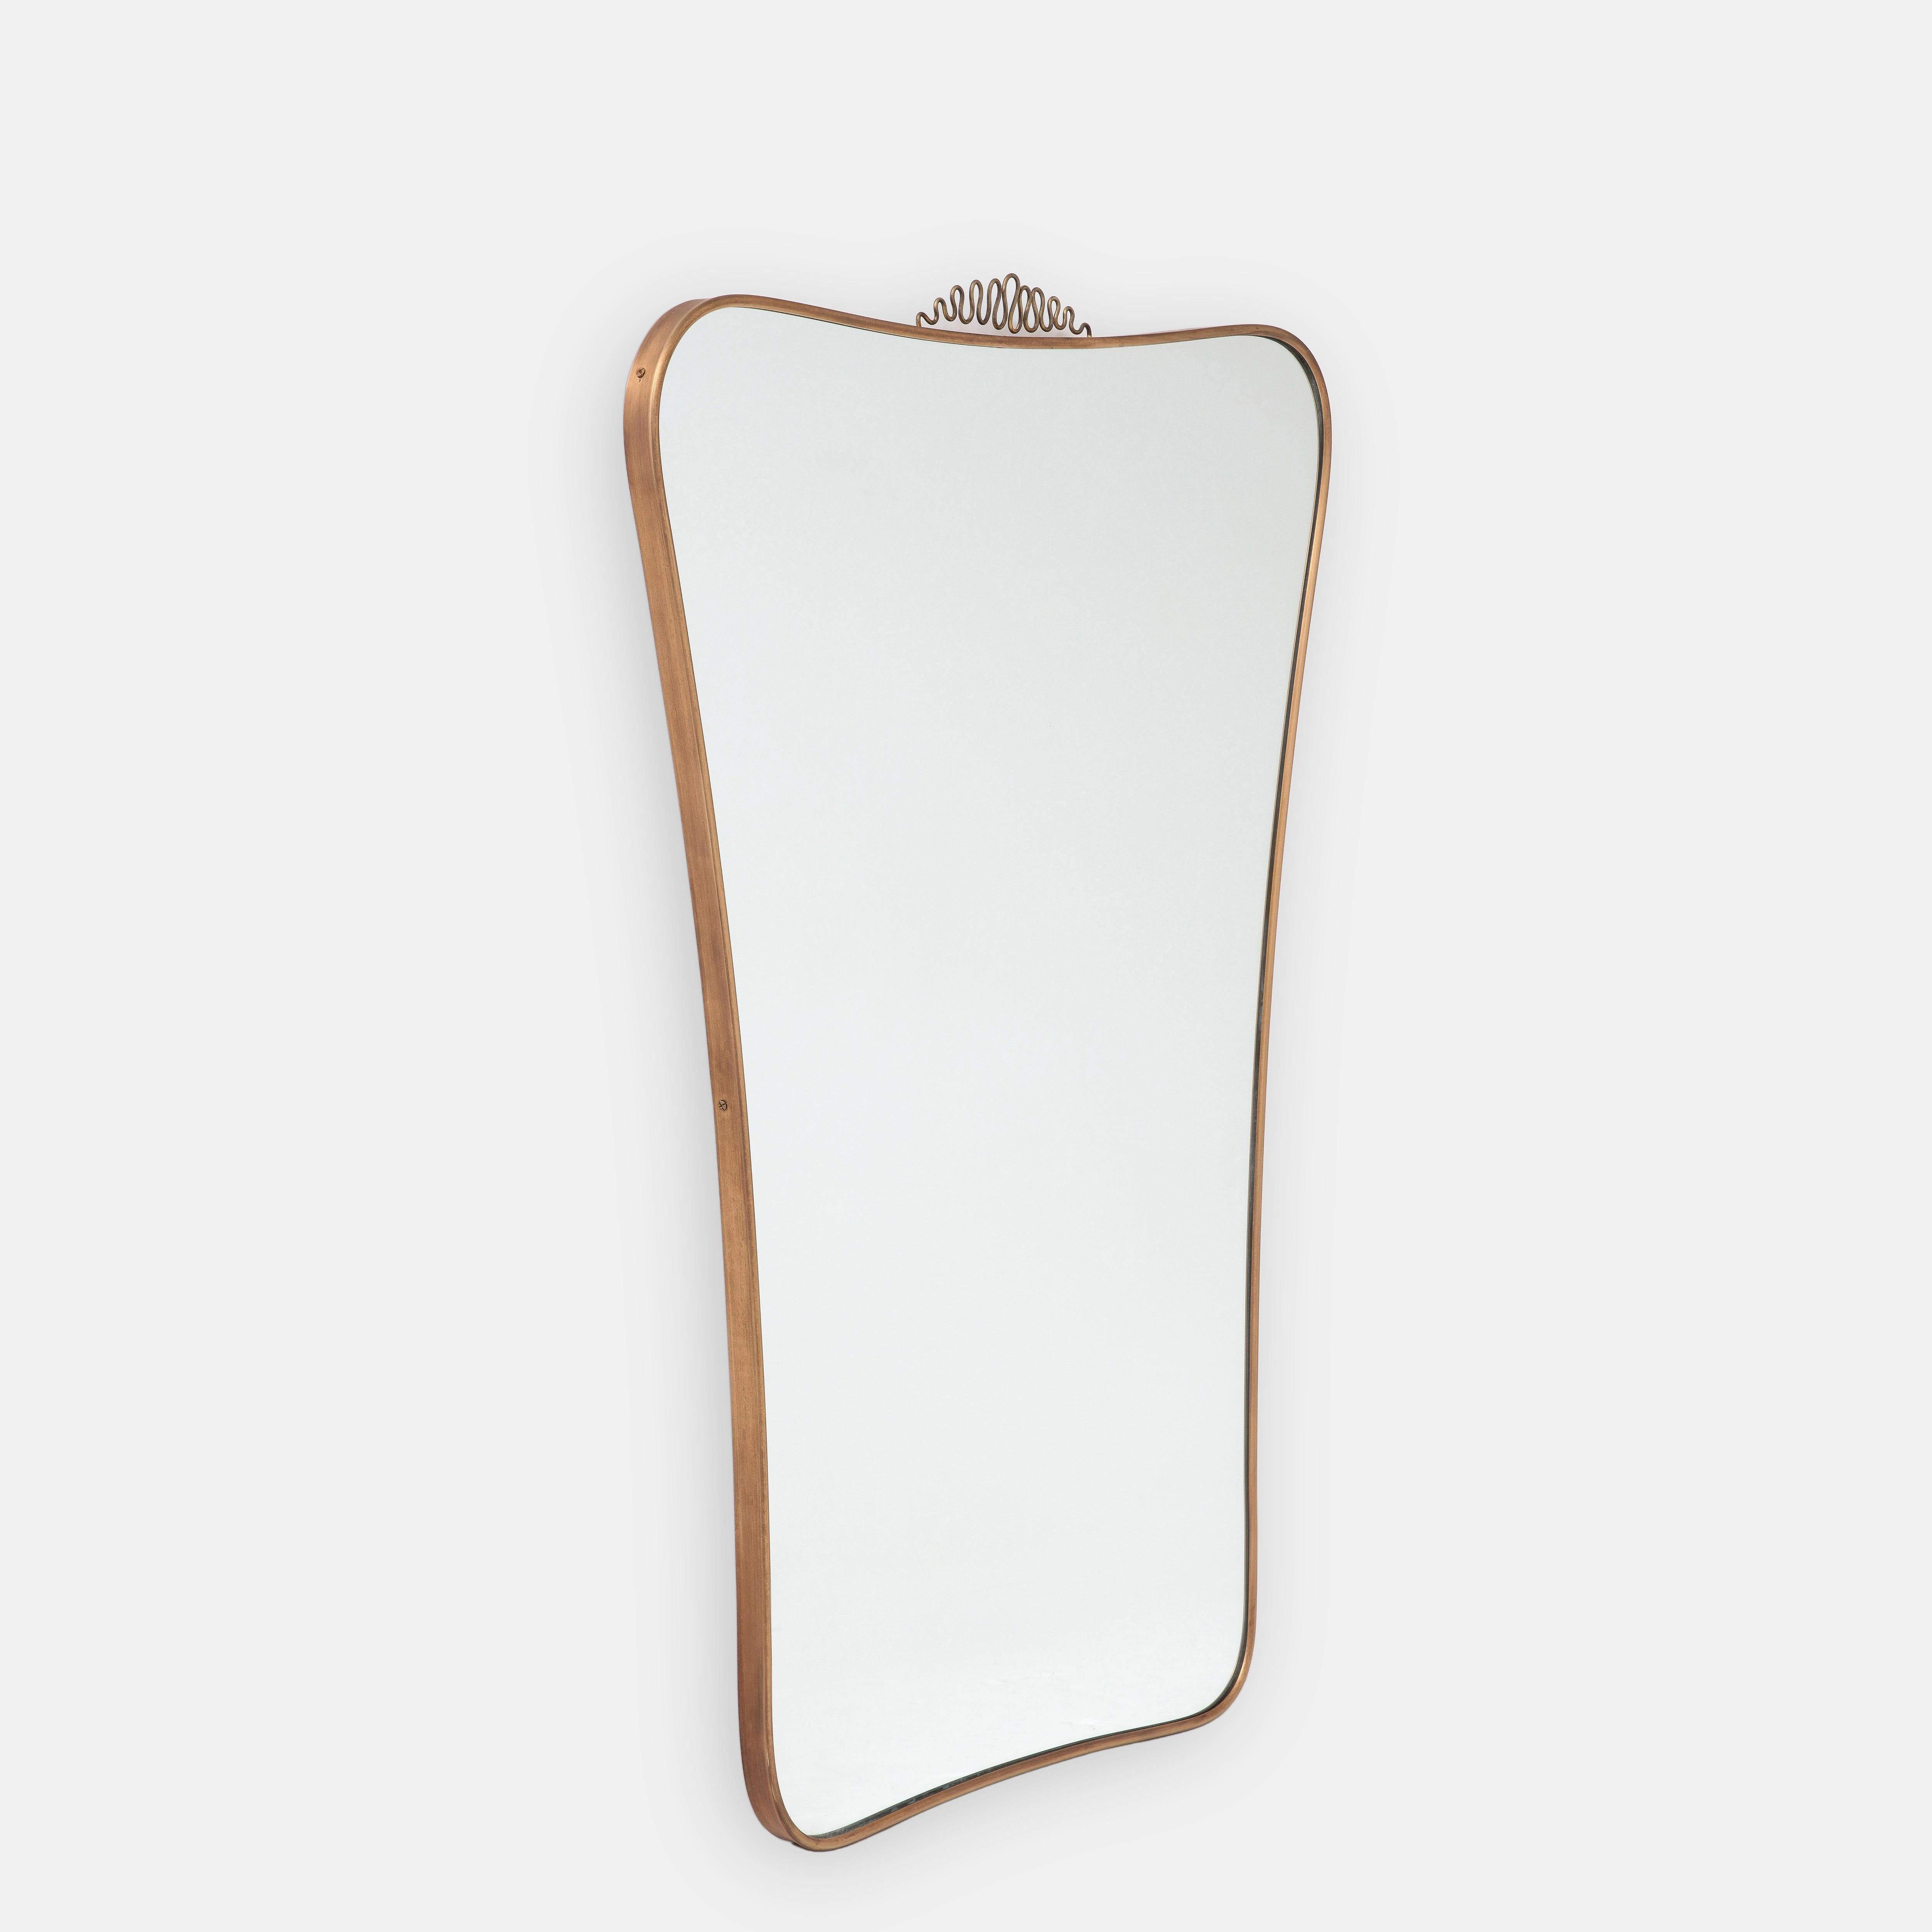 1950s Italian Modernist Brass Mirror with Scroll Top Attributed to Gio Ponti In Good Condition For Sale In New York, NY